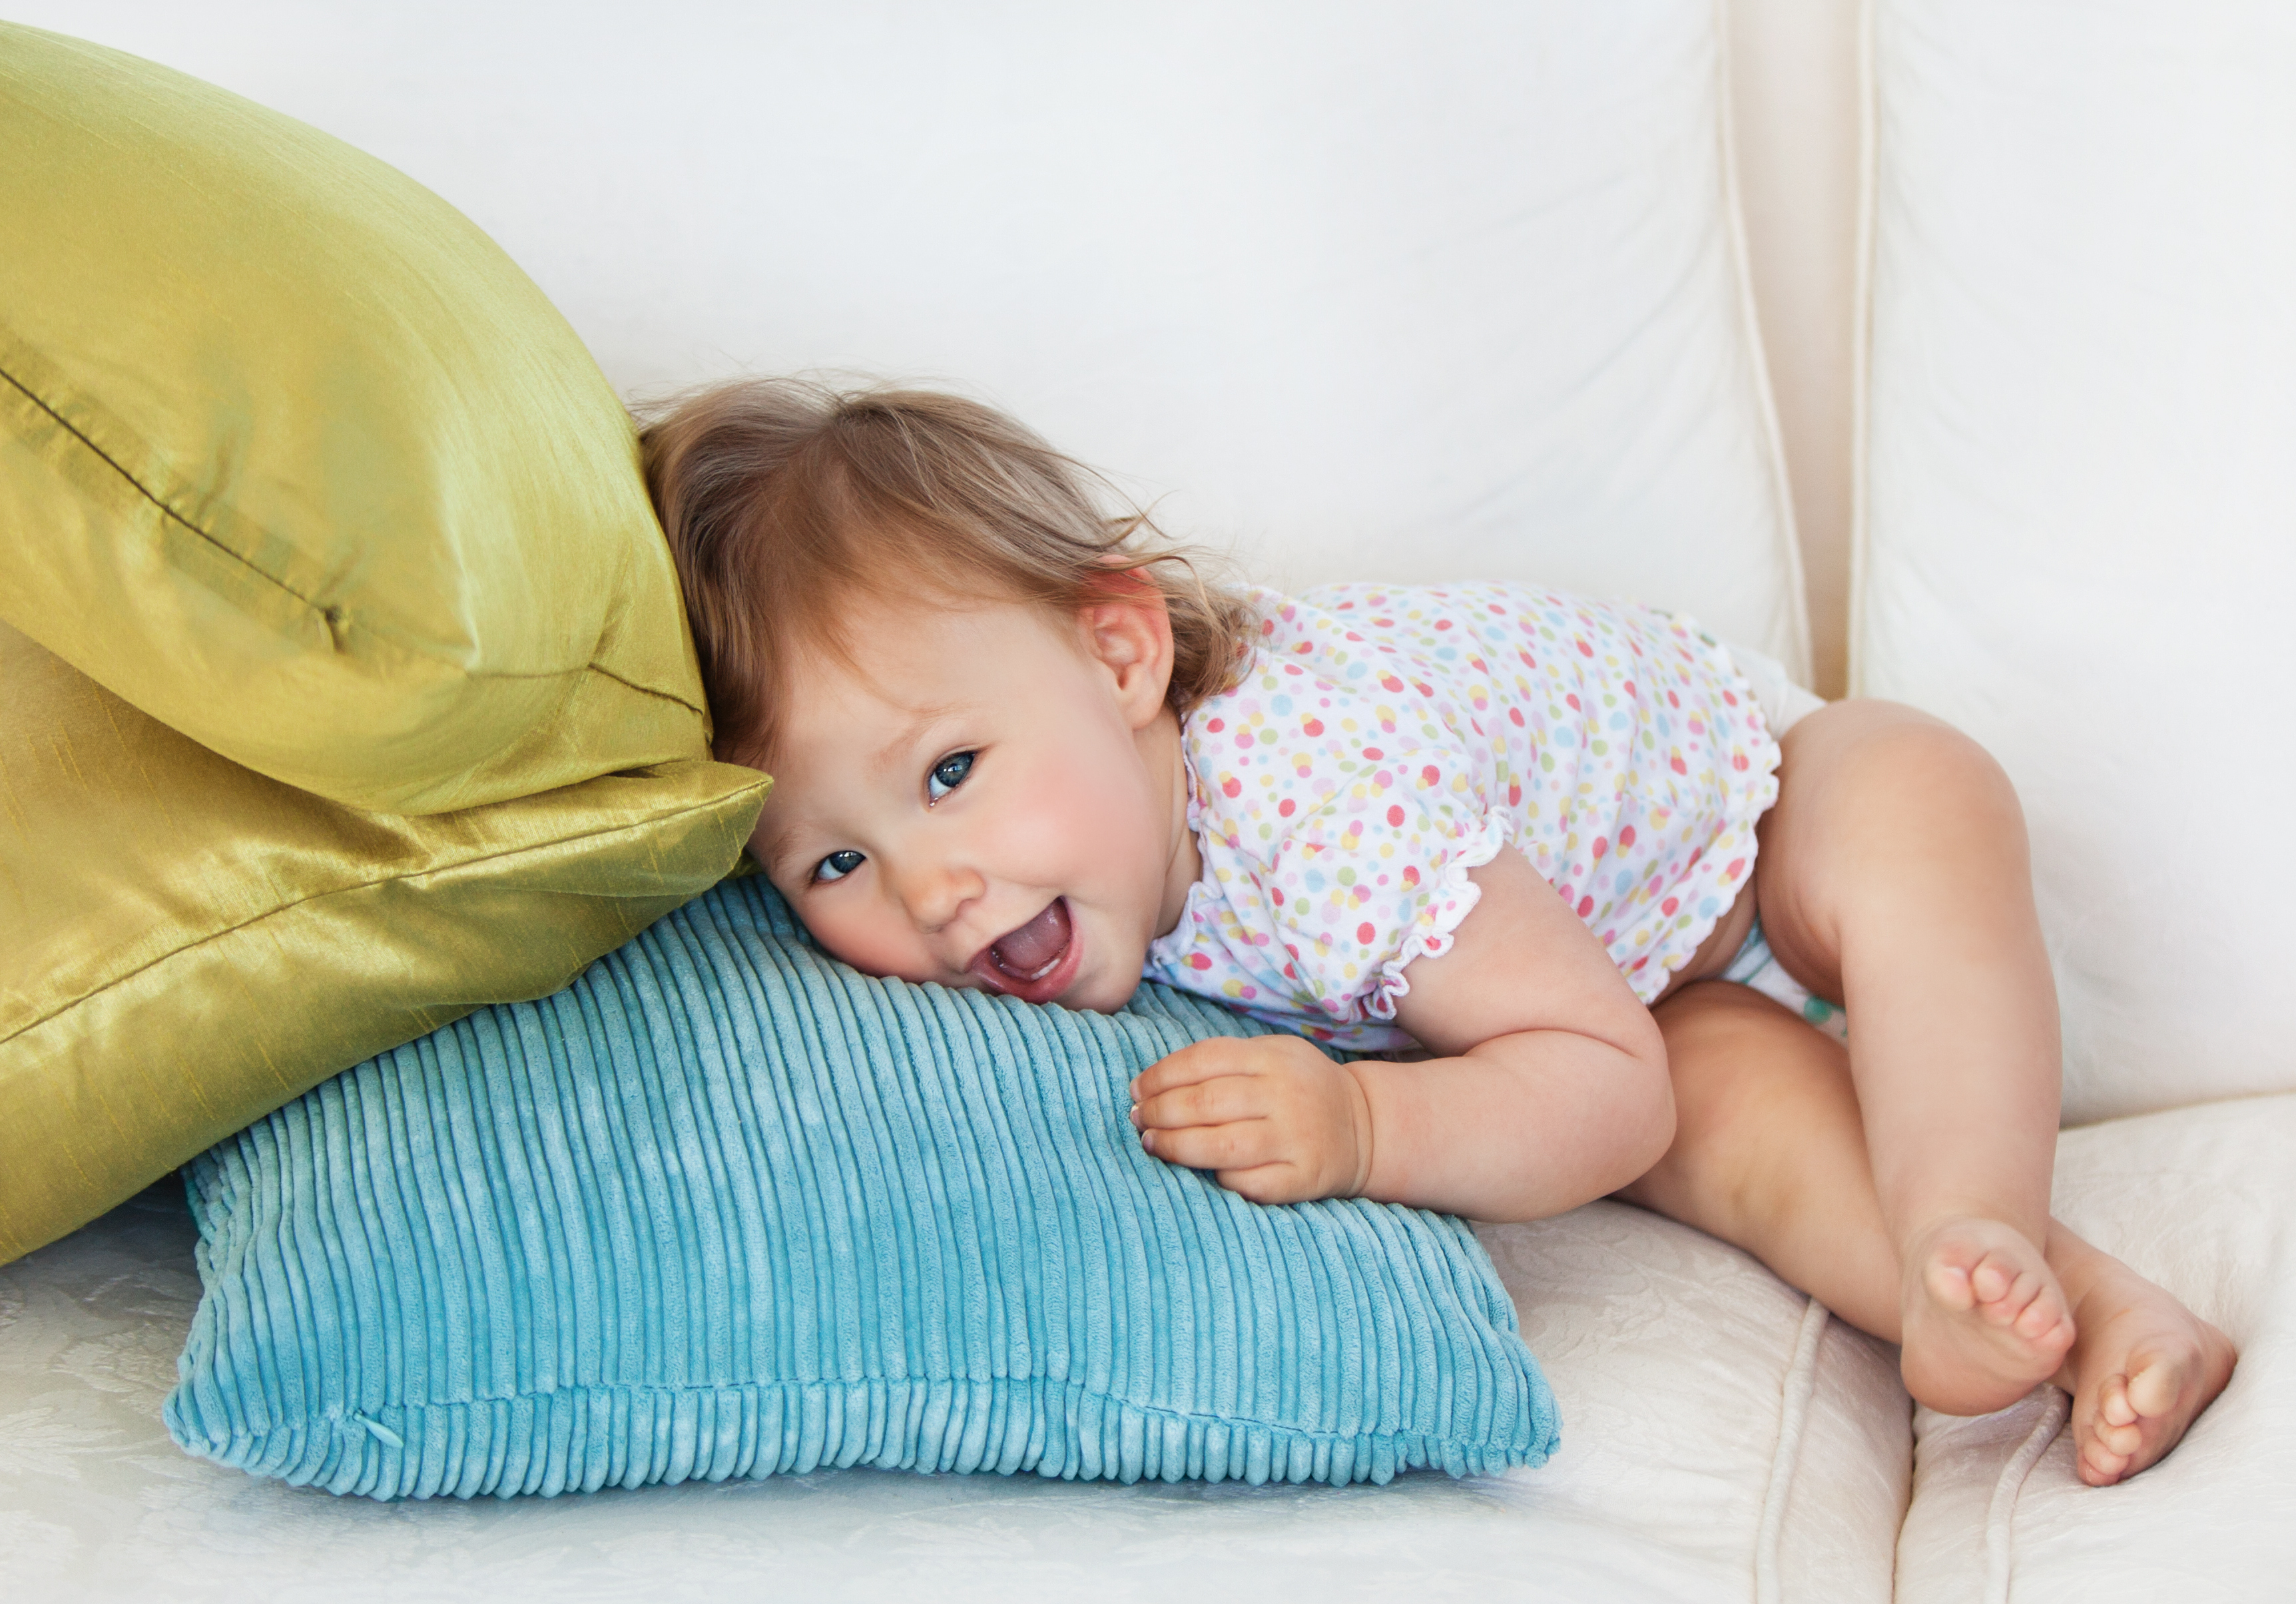 LISTEN: "Help. My 2yo is humping the couch."